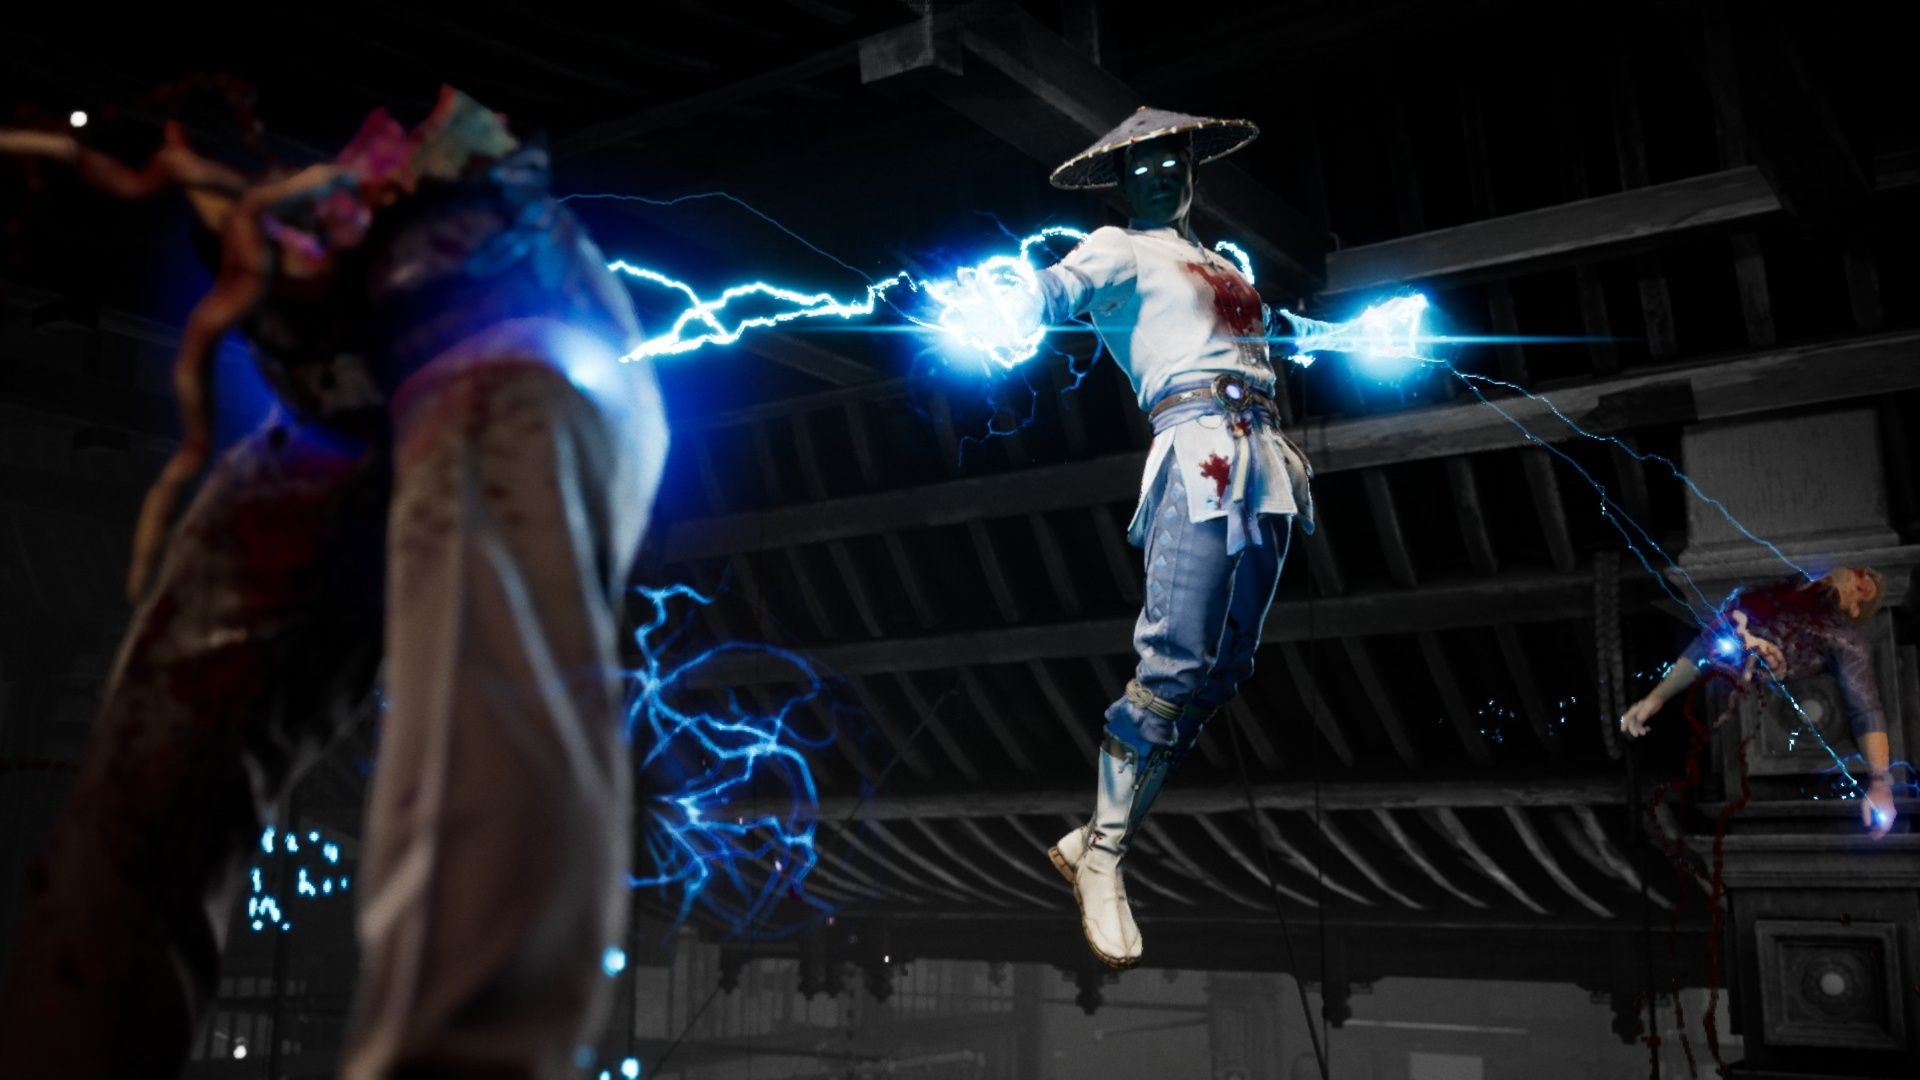 Raiden using his first Fatality on Johnny Cage, electrocuting both halves of his body in Mortal Kombat 1.